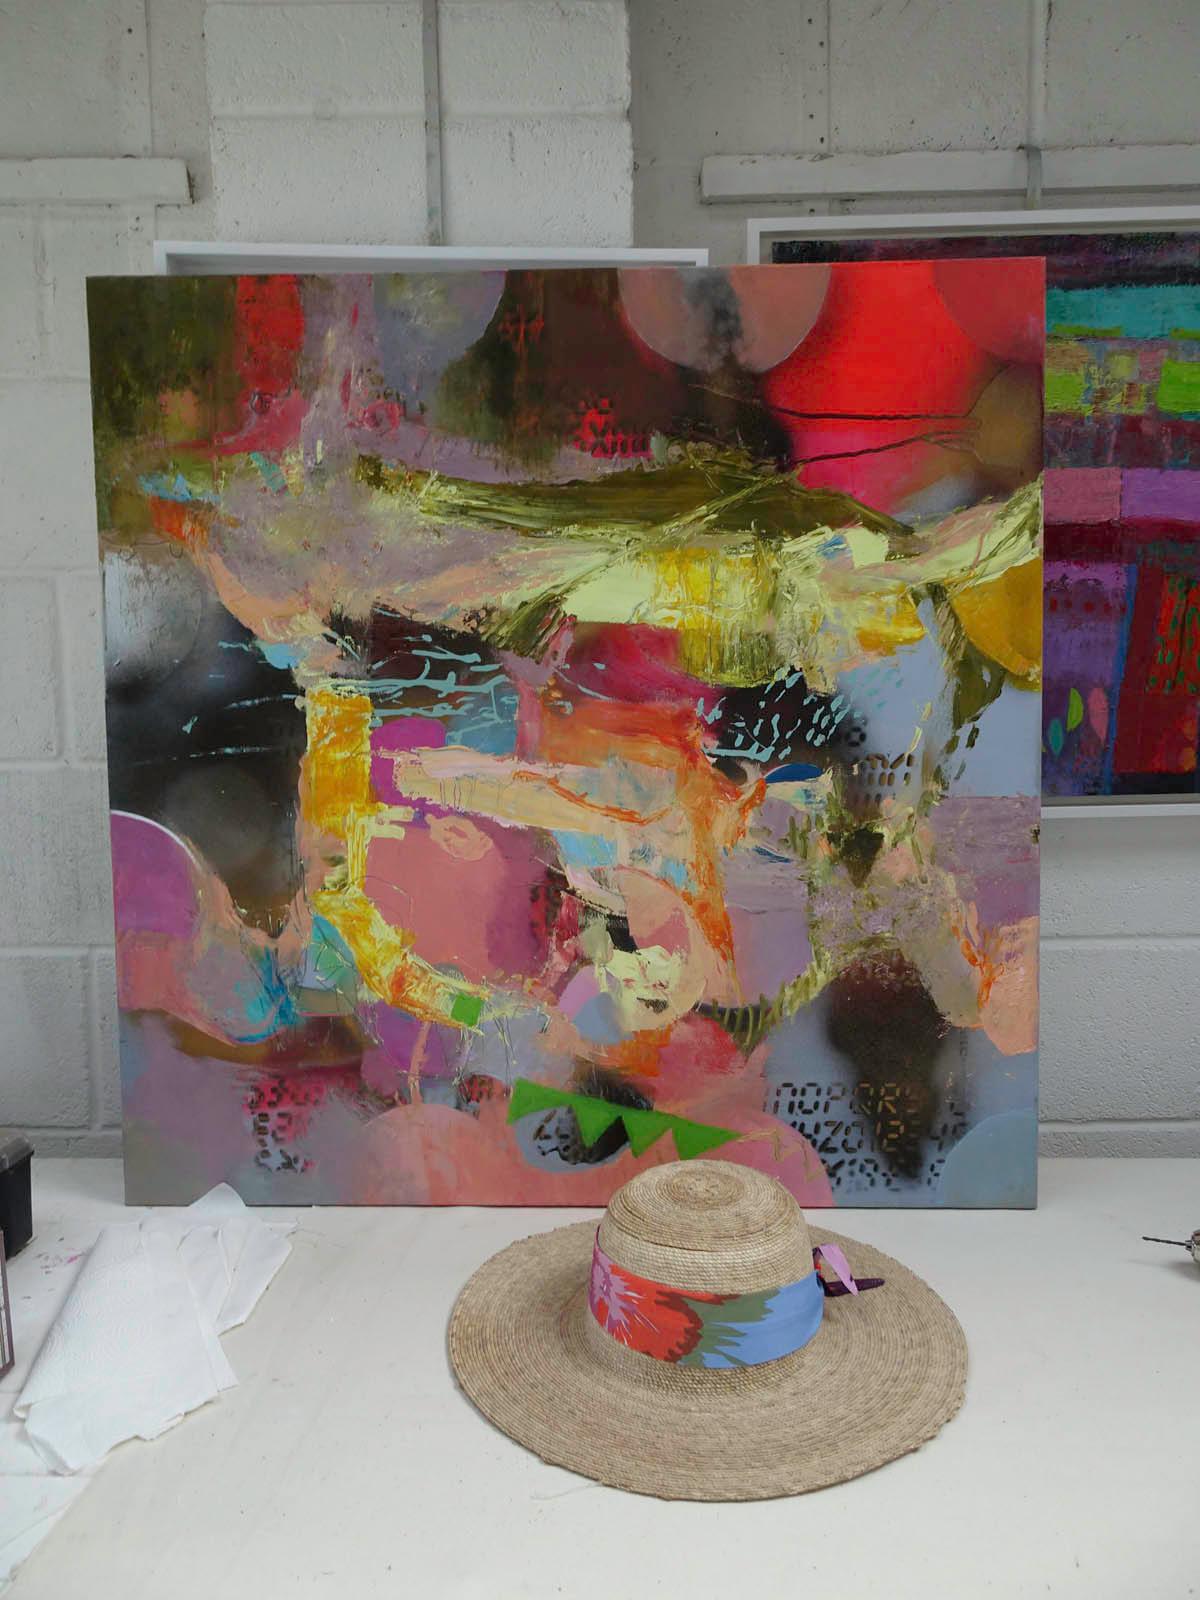 Teresa Pemberton Finding the Clues 2014 Inspired by the landscape and archeology of Dartmoor where a Bronze Age grave was discovered. Contemporary painting. Vibrant colour. Experimental. Mixed media: acrylic, spray paint,
oil paint.